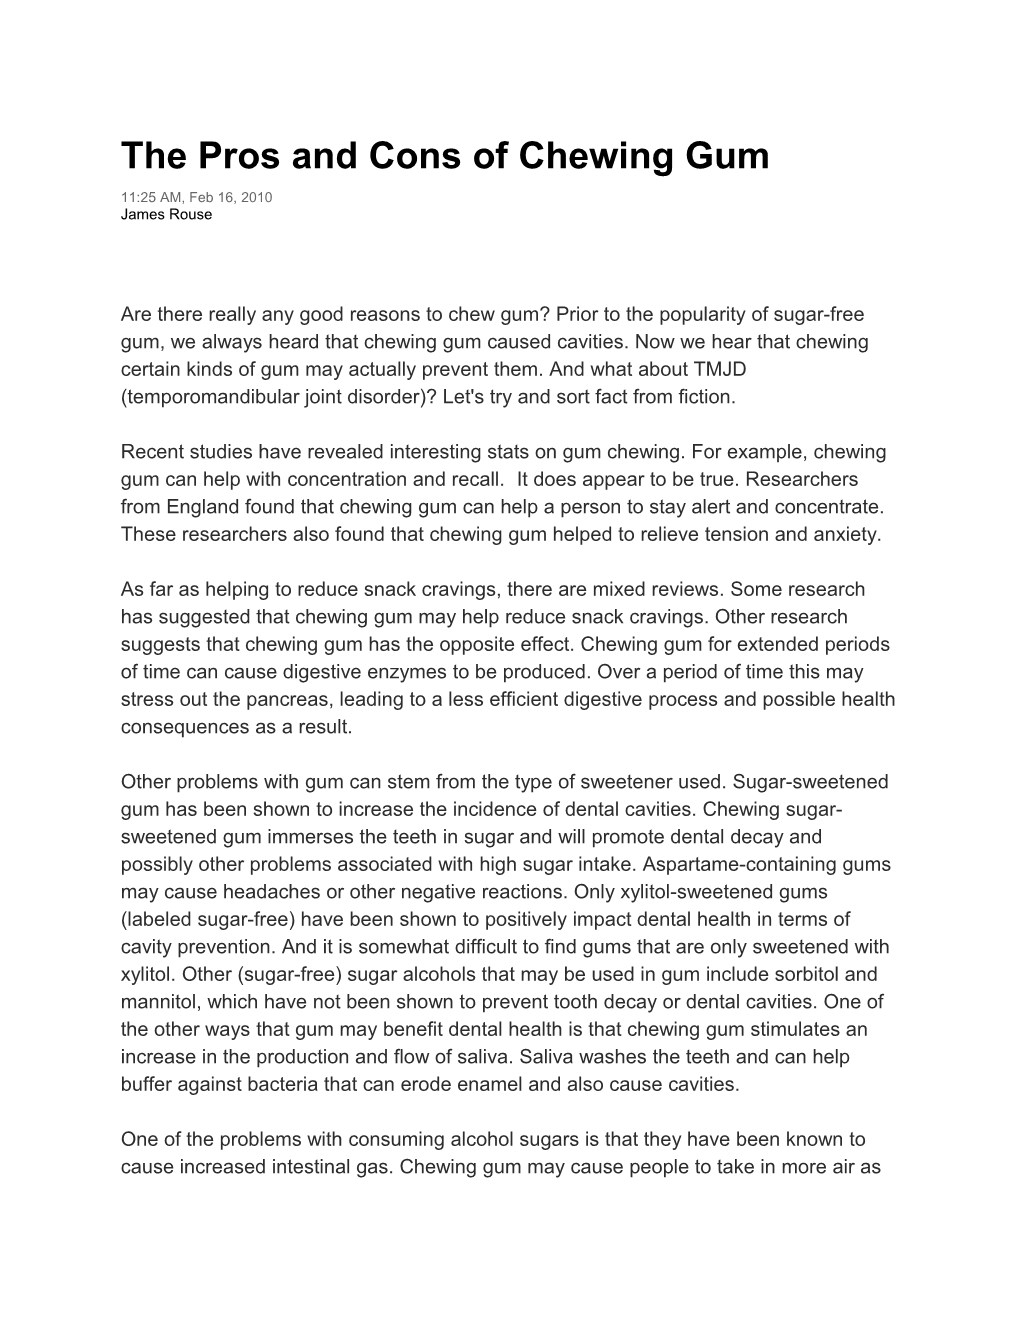 The Pros and Cons of Chewing Gum